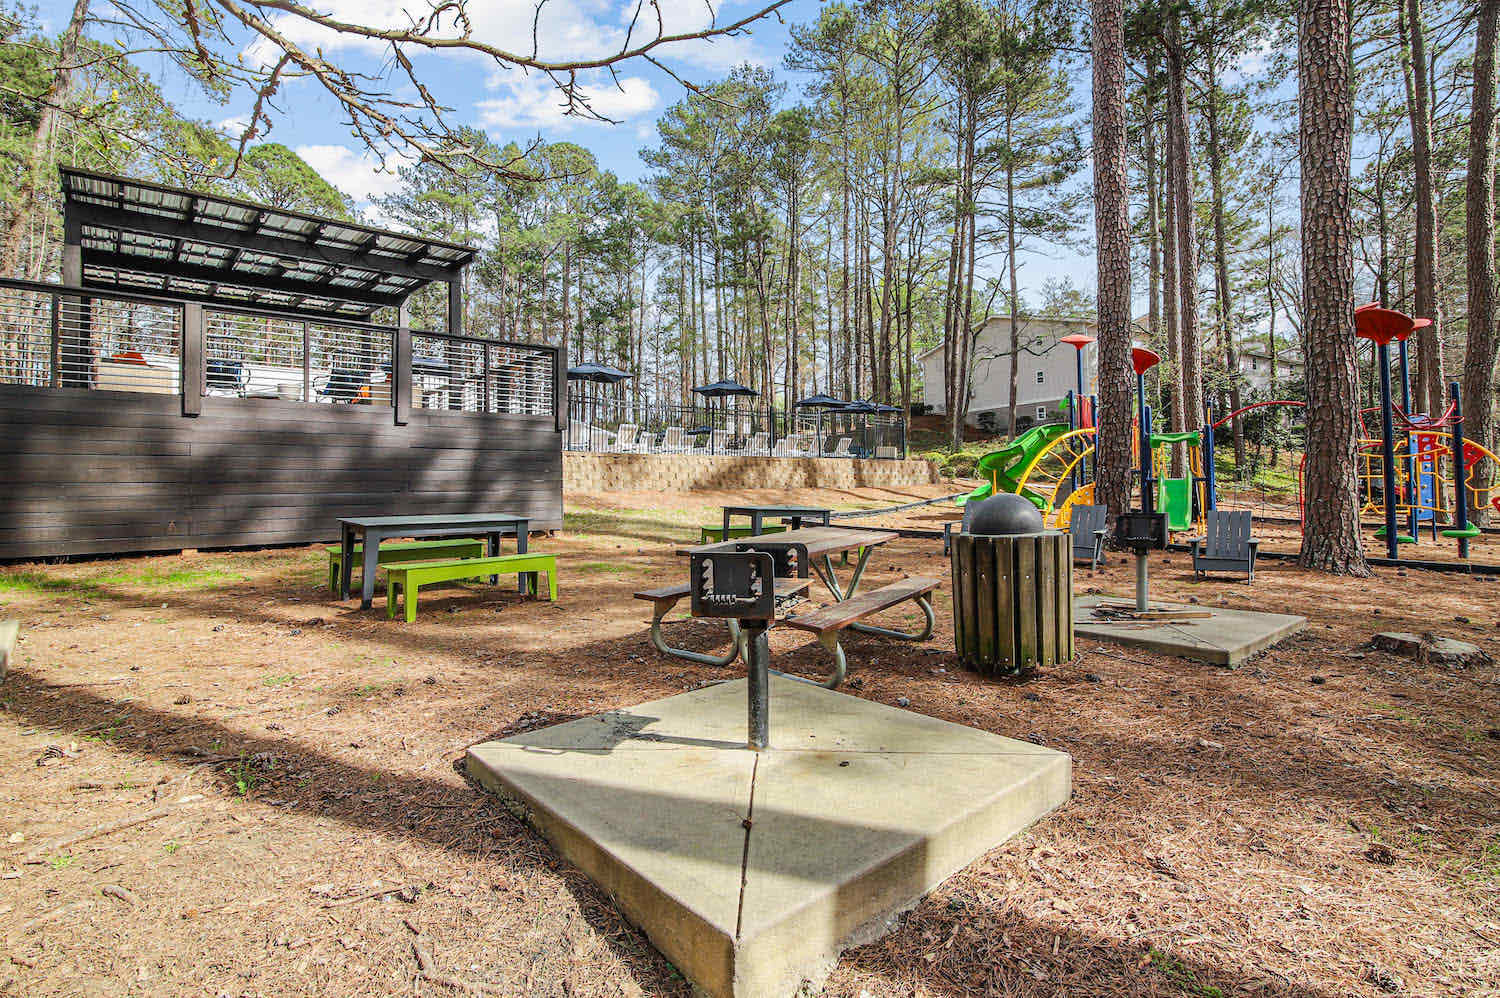 Picnic area by playground